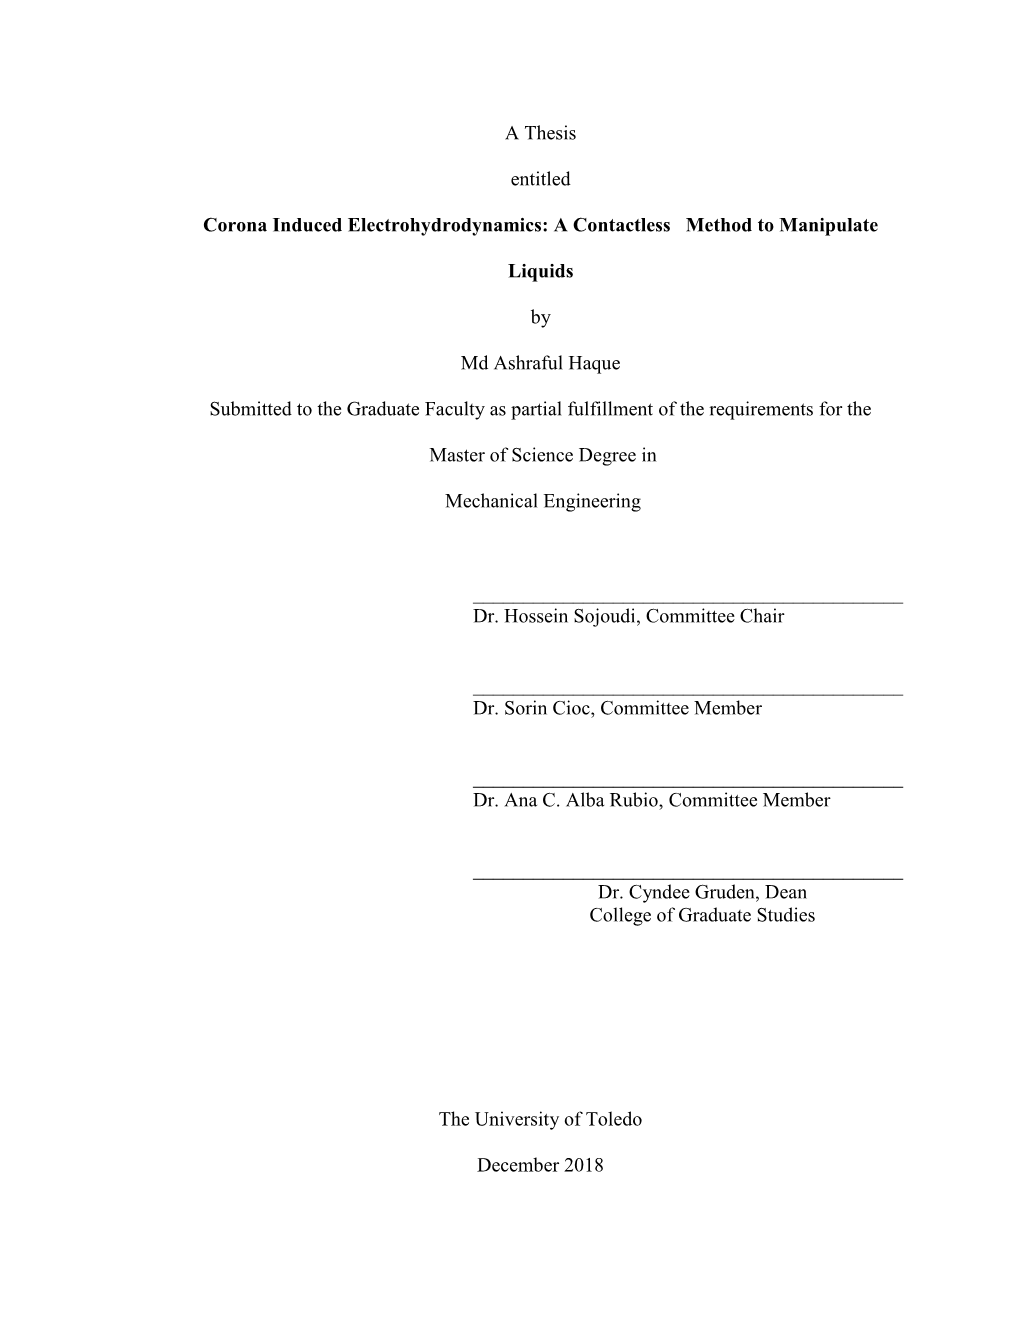 A Thesis Entitled Corona Induced Electrohydrodynamics: A